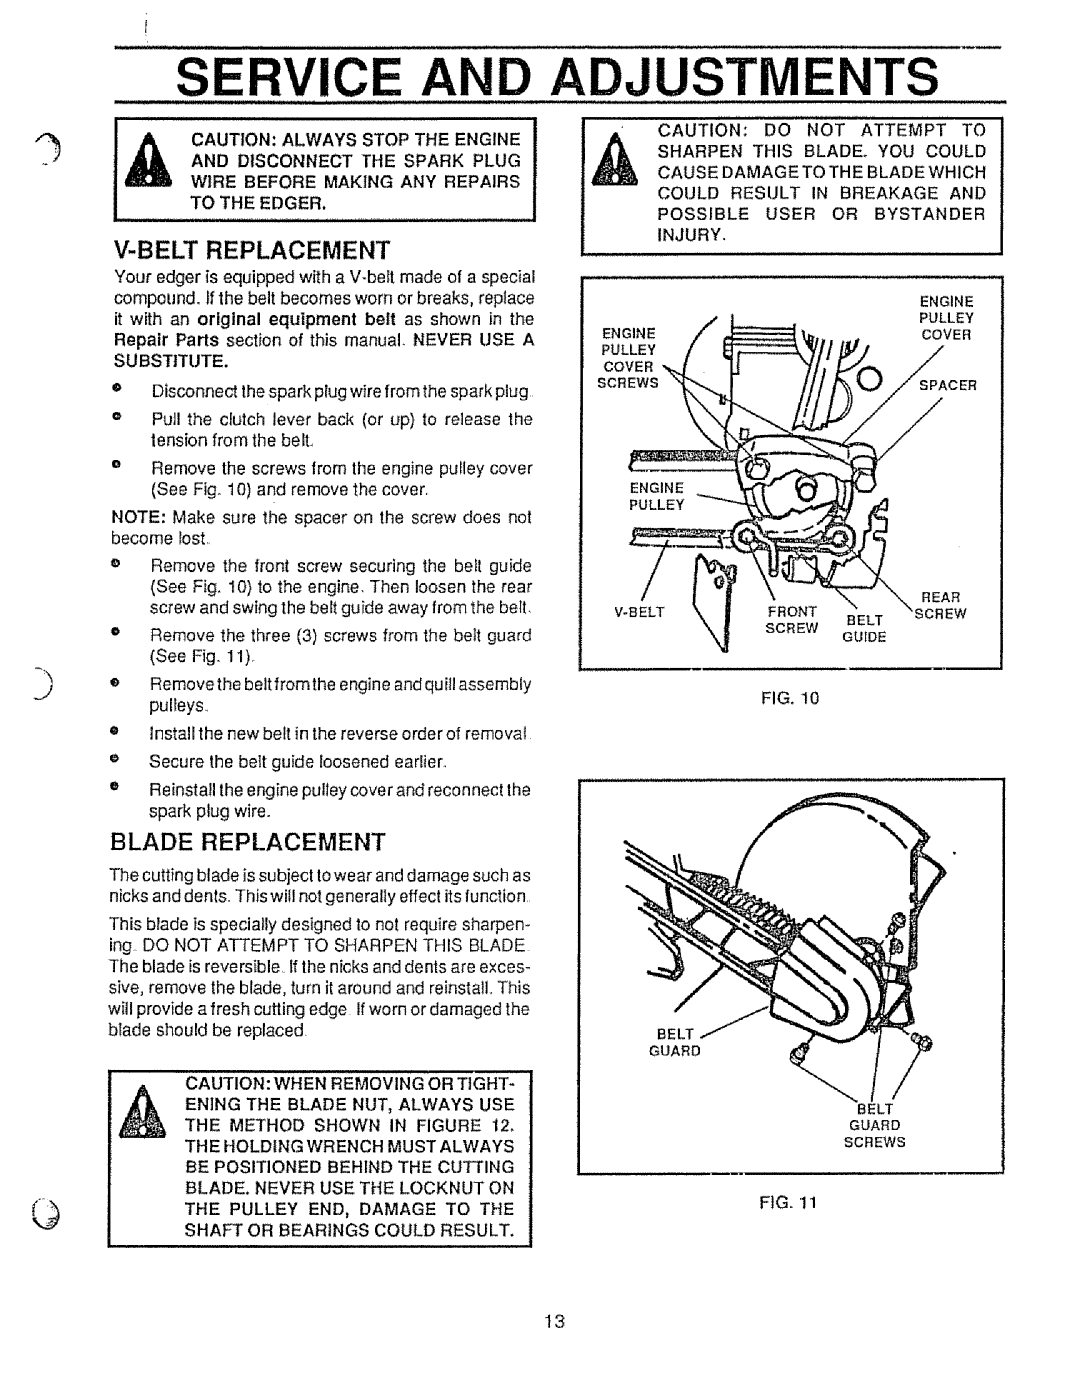 Sears 536.79751 owner manual Service And, Adjustments, V-Beltreplacement, Blade Replacement 